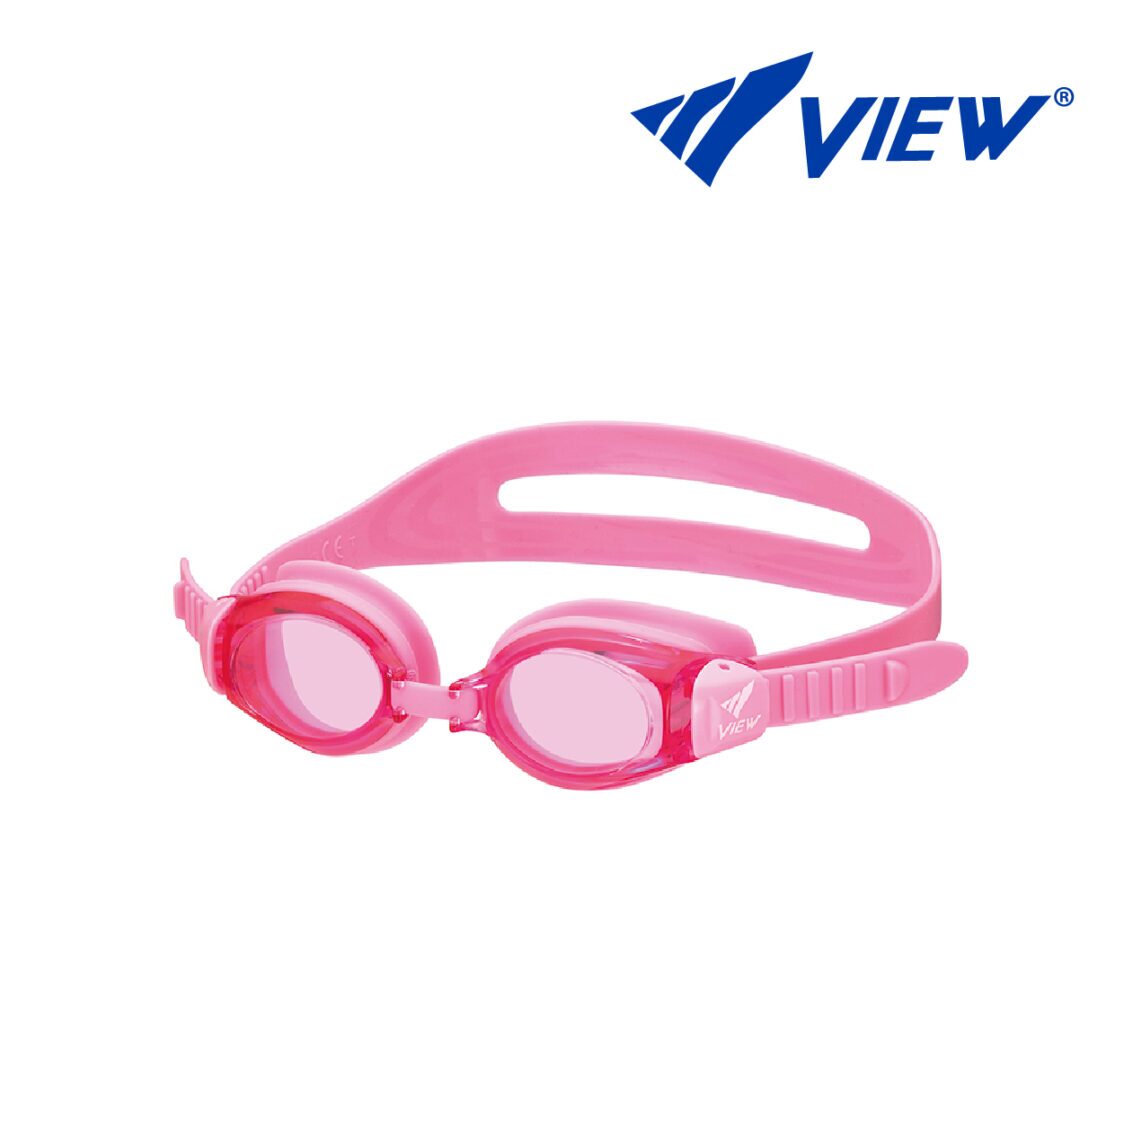 View Junior Goggle Pink